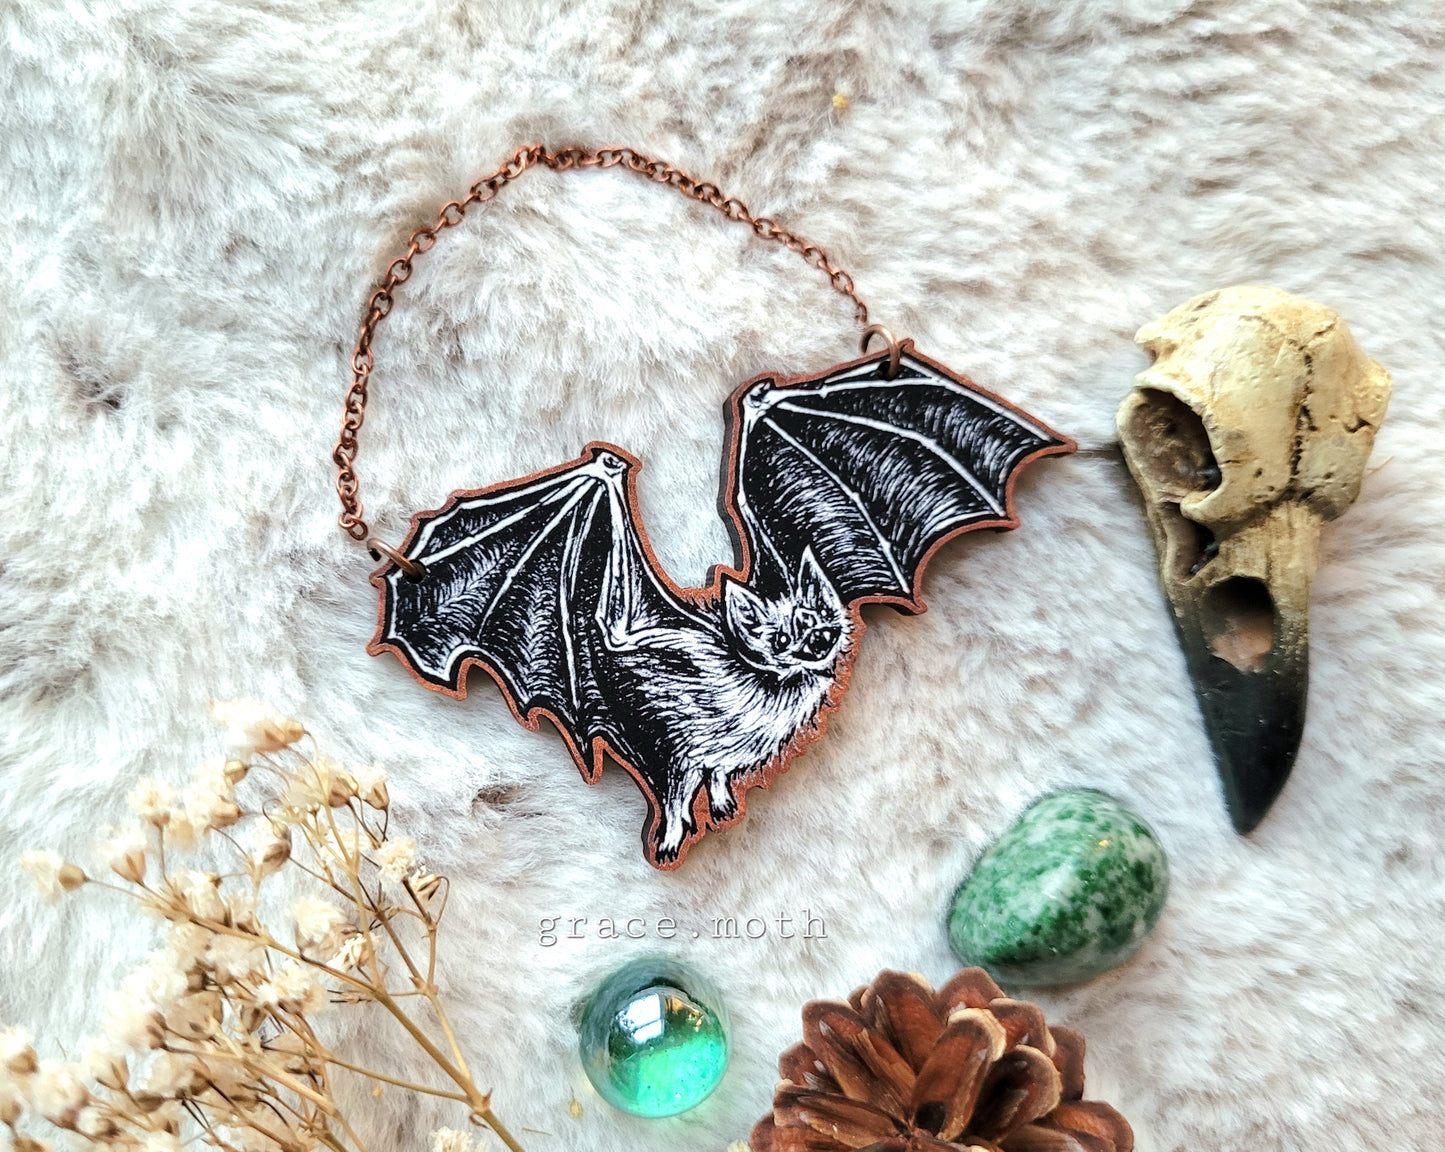 Large Bat illustrated ornament, wall hanging, 7.5cm responsibly sourced cherry wood, by Grace Moth